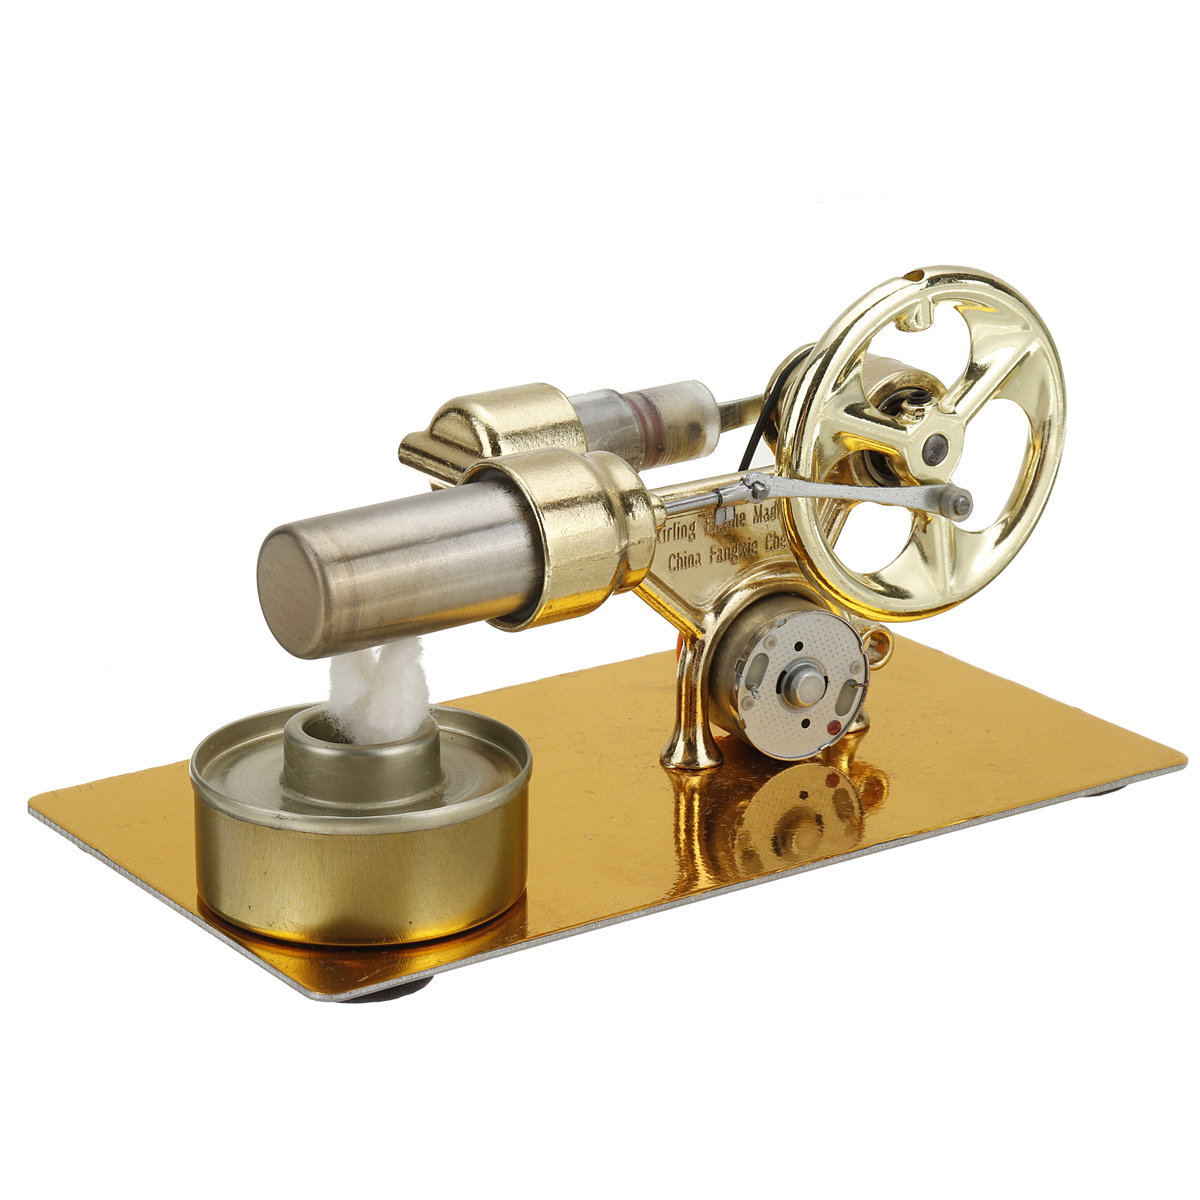 1PC-16-x-85-x-11-cm--Physical-Science-DIY-Kits-Stirling-Engine-Model-with-Parts-1939762-6